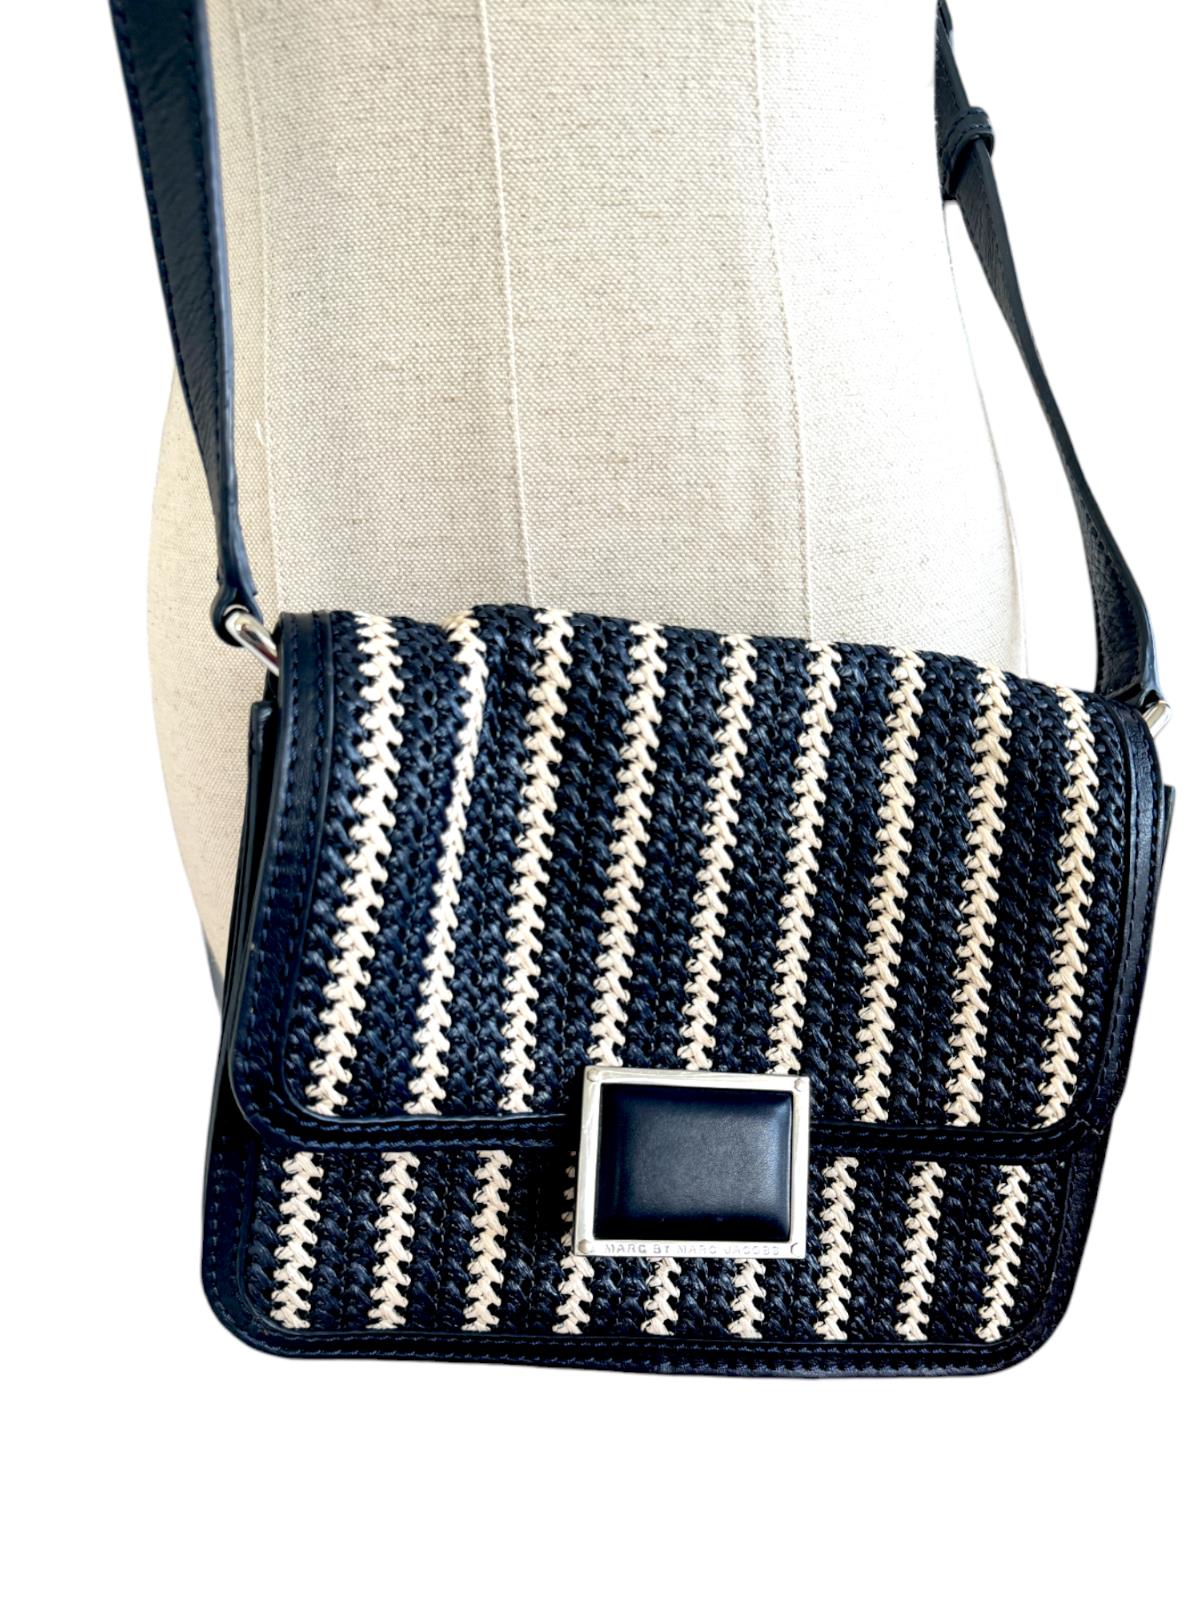 MARC JACOBS Leather Woven Raffia Bag | Crossbody, Flap, Navy Blue/White AS NEW!!